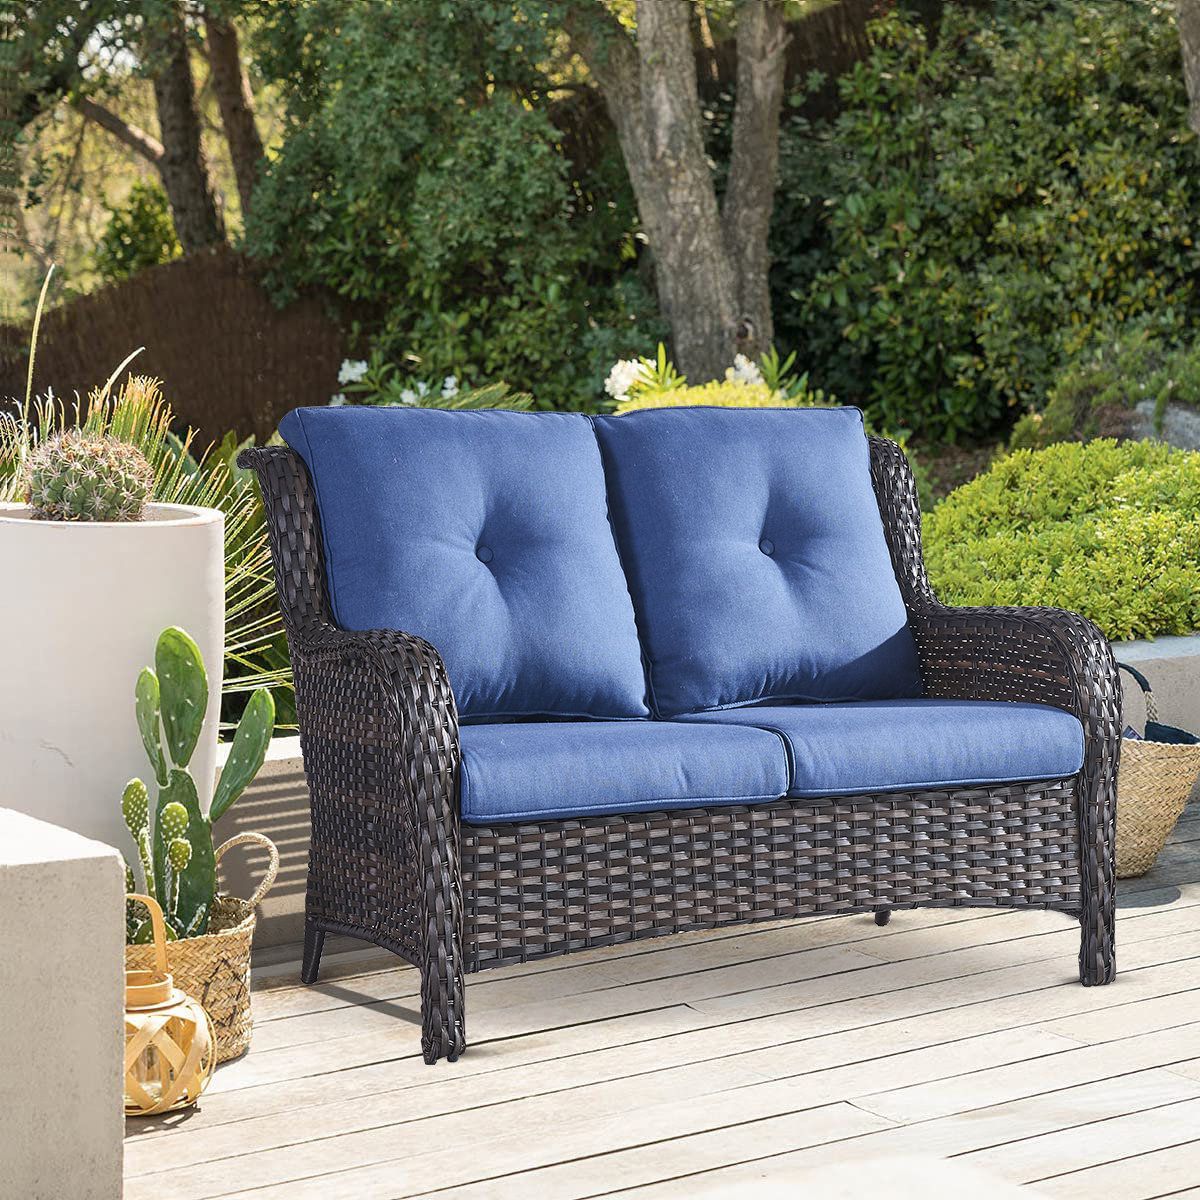 Most Up To Date Loveseat Chairs For Backyard With Hummuh Carolina 53'' Wicker Outdoor Loveseat & Reviews (View 11 of 15)